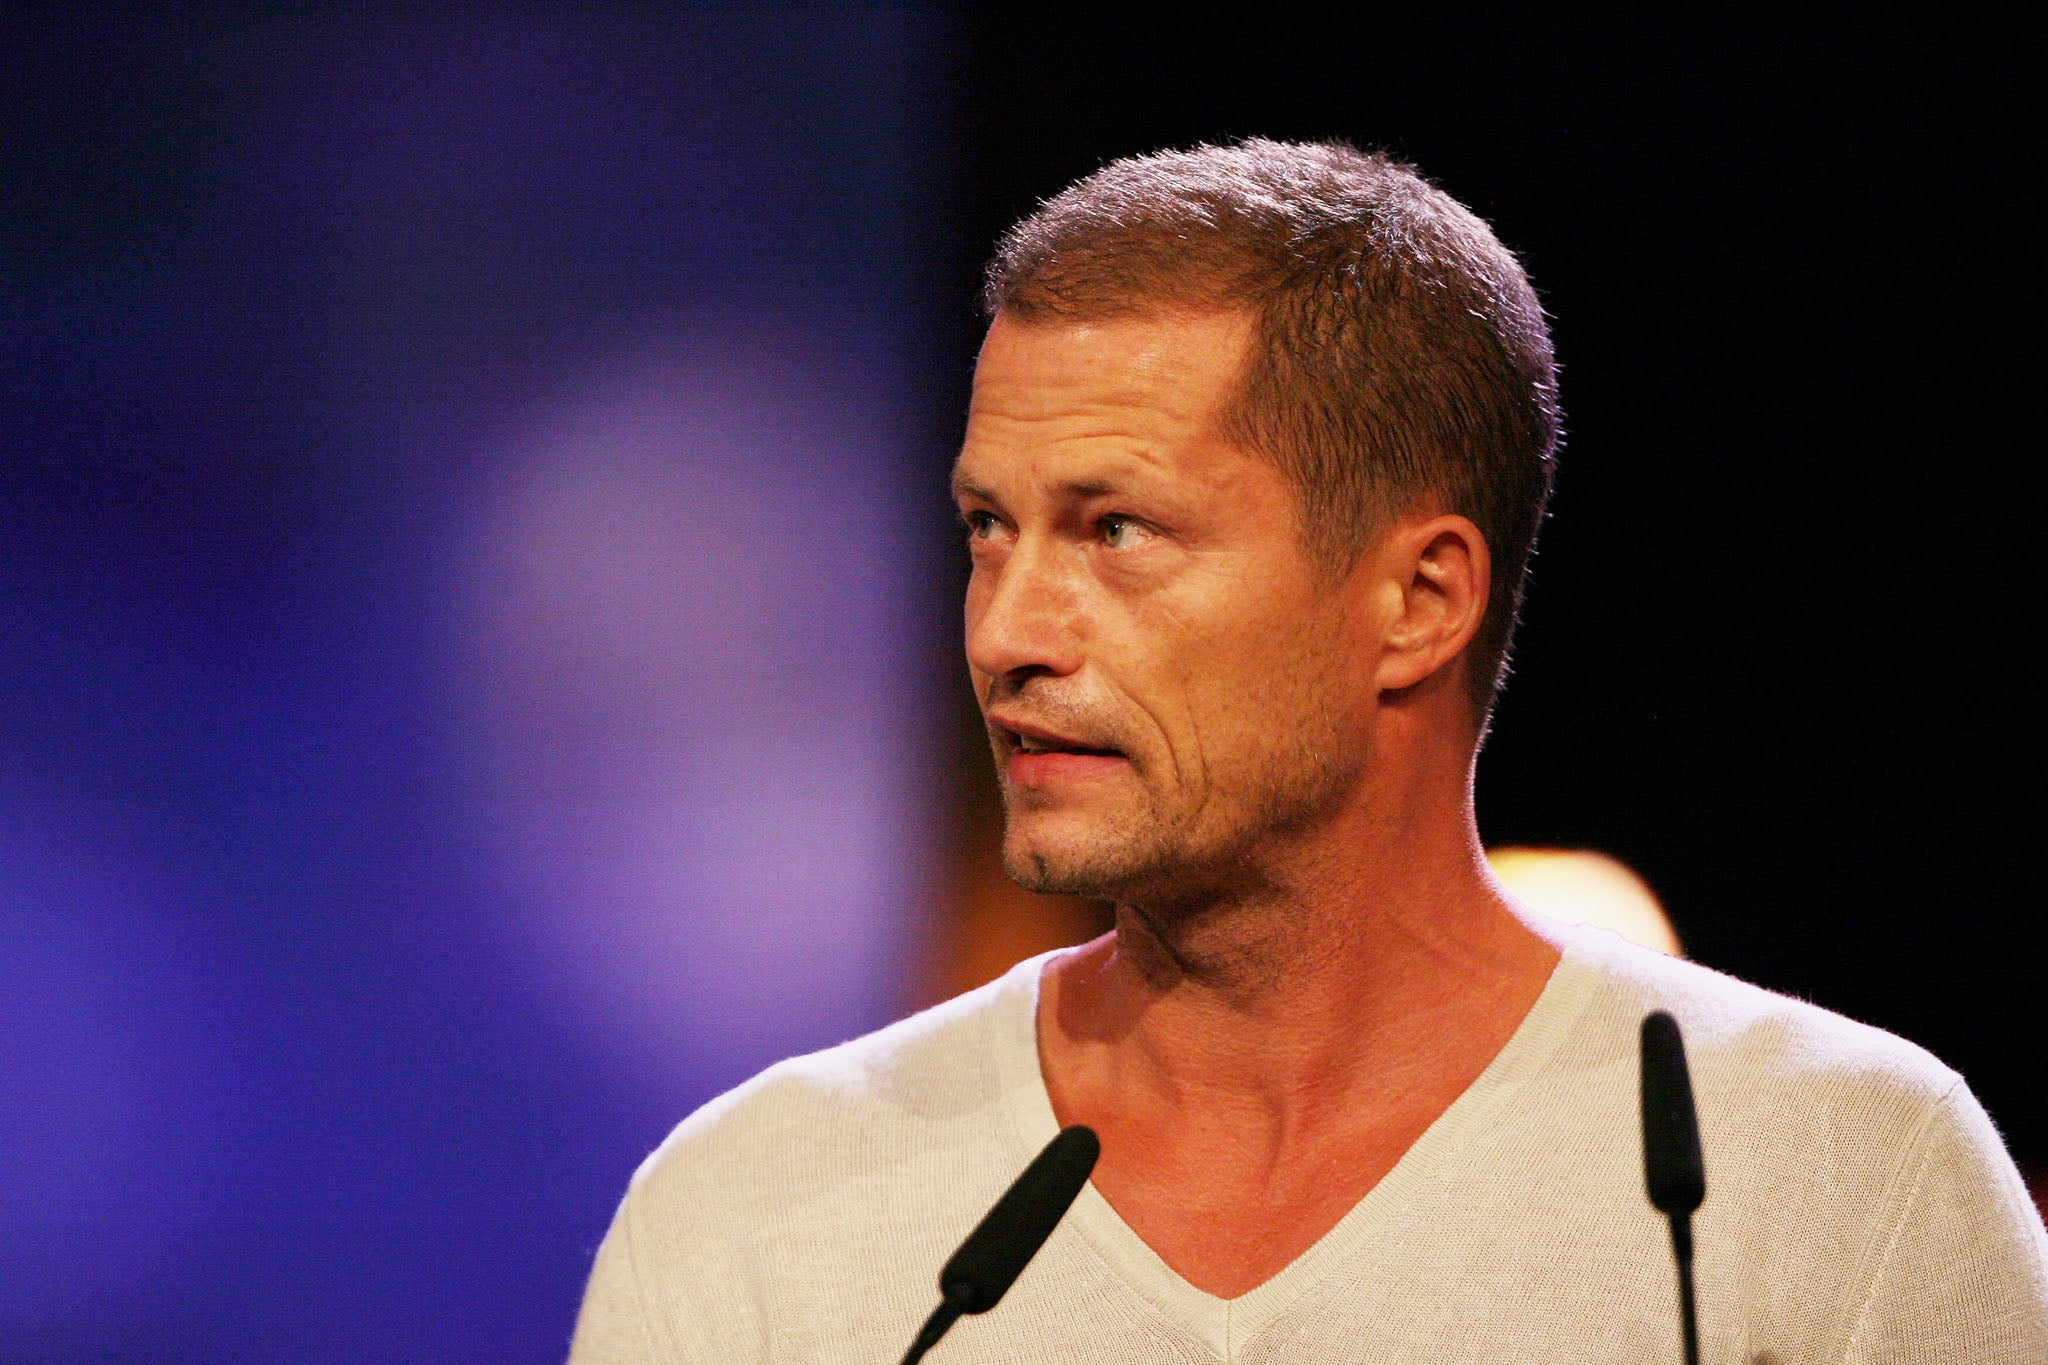 Inglorious Basterds actor Til Schweiger is best known for playing Hugo Stiglitz in the Tarantino film